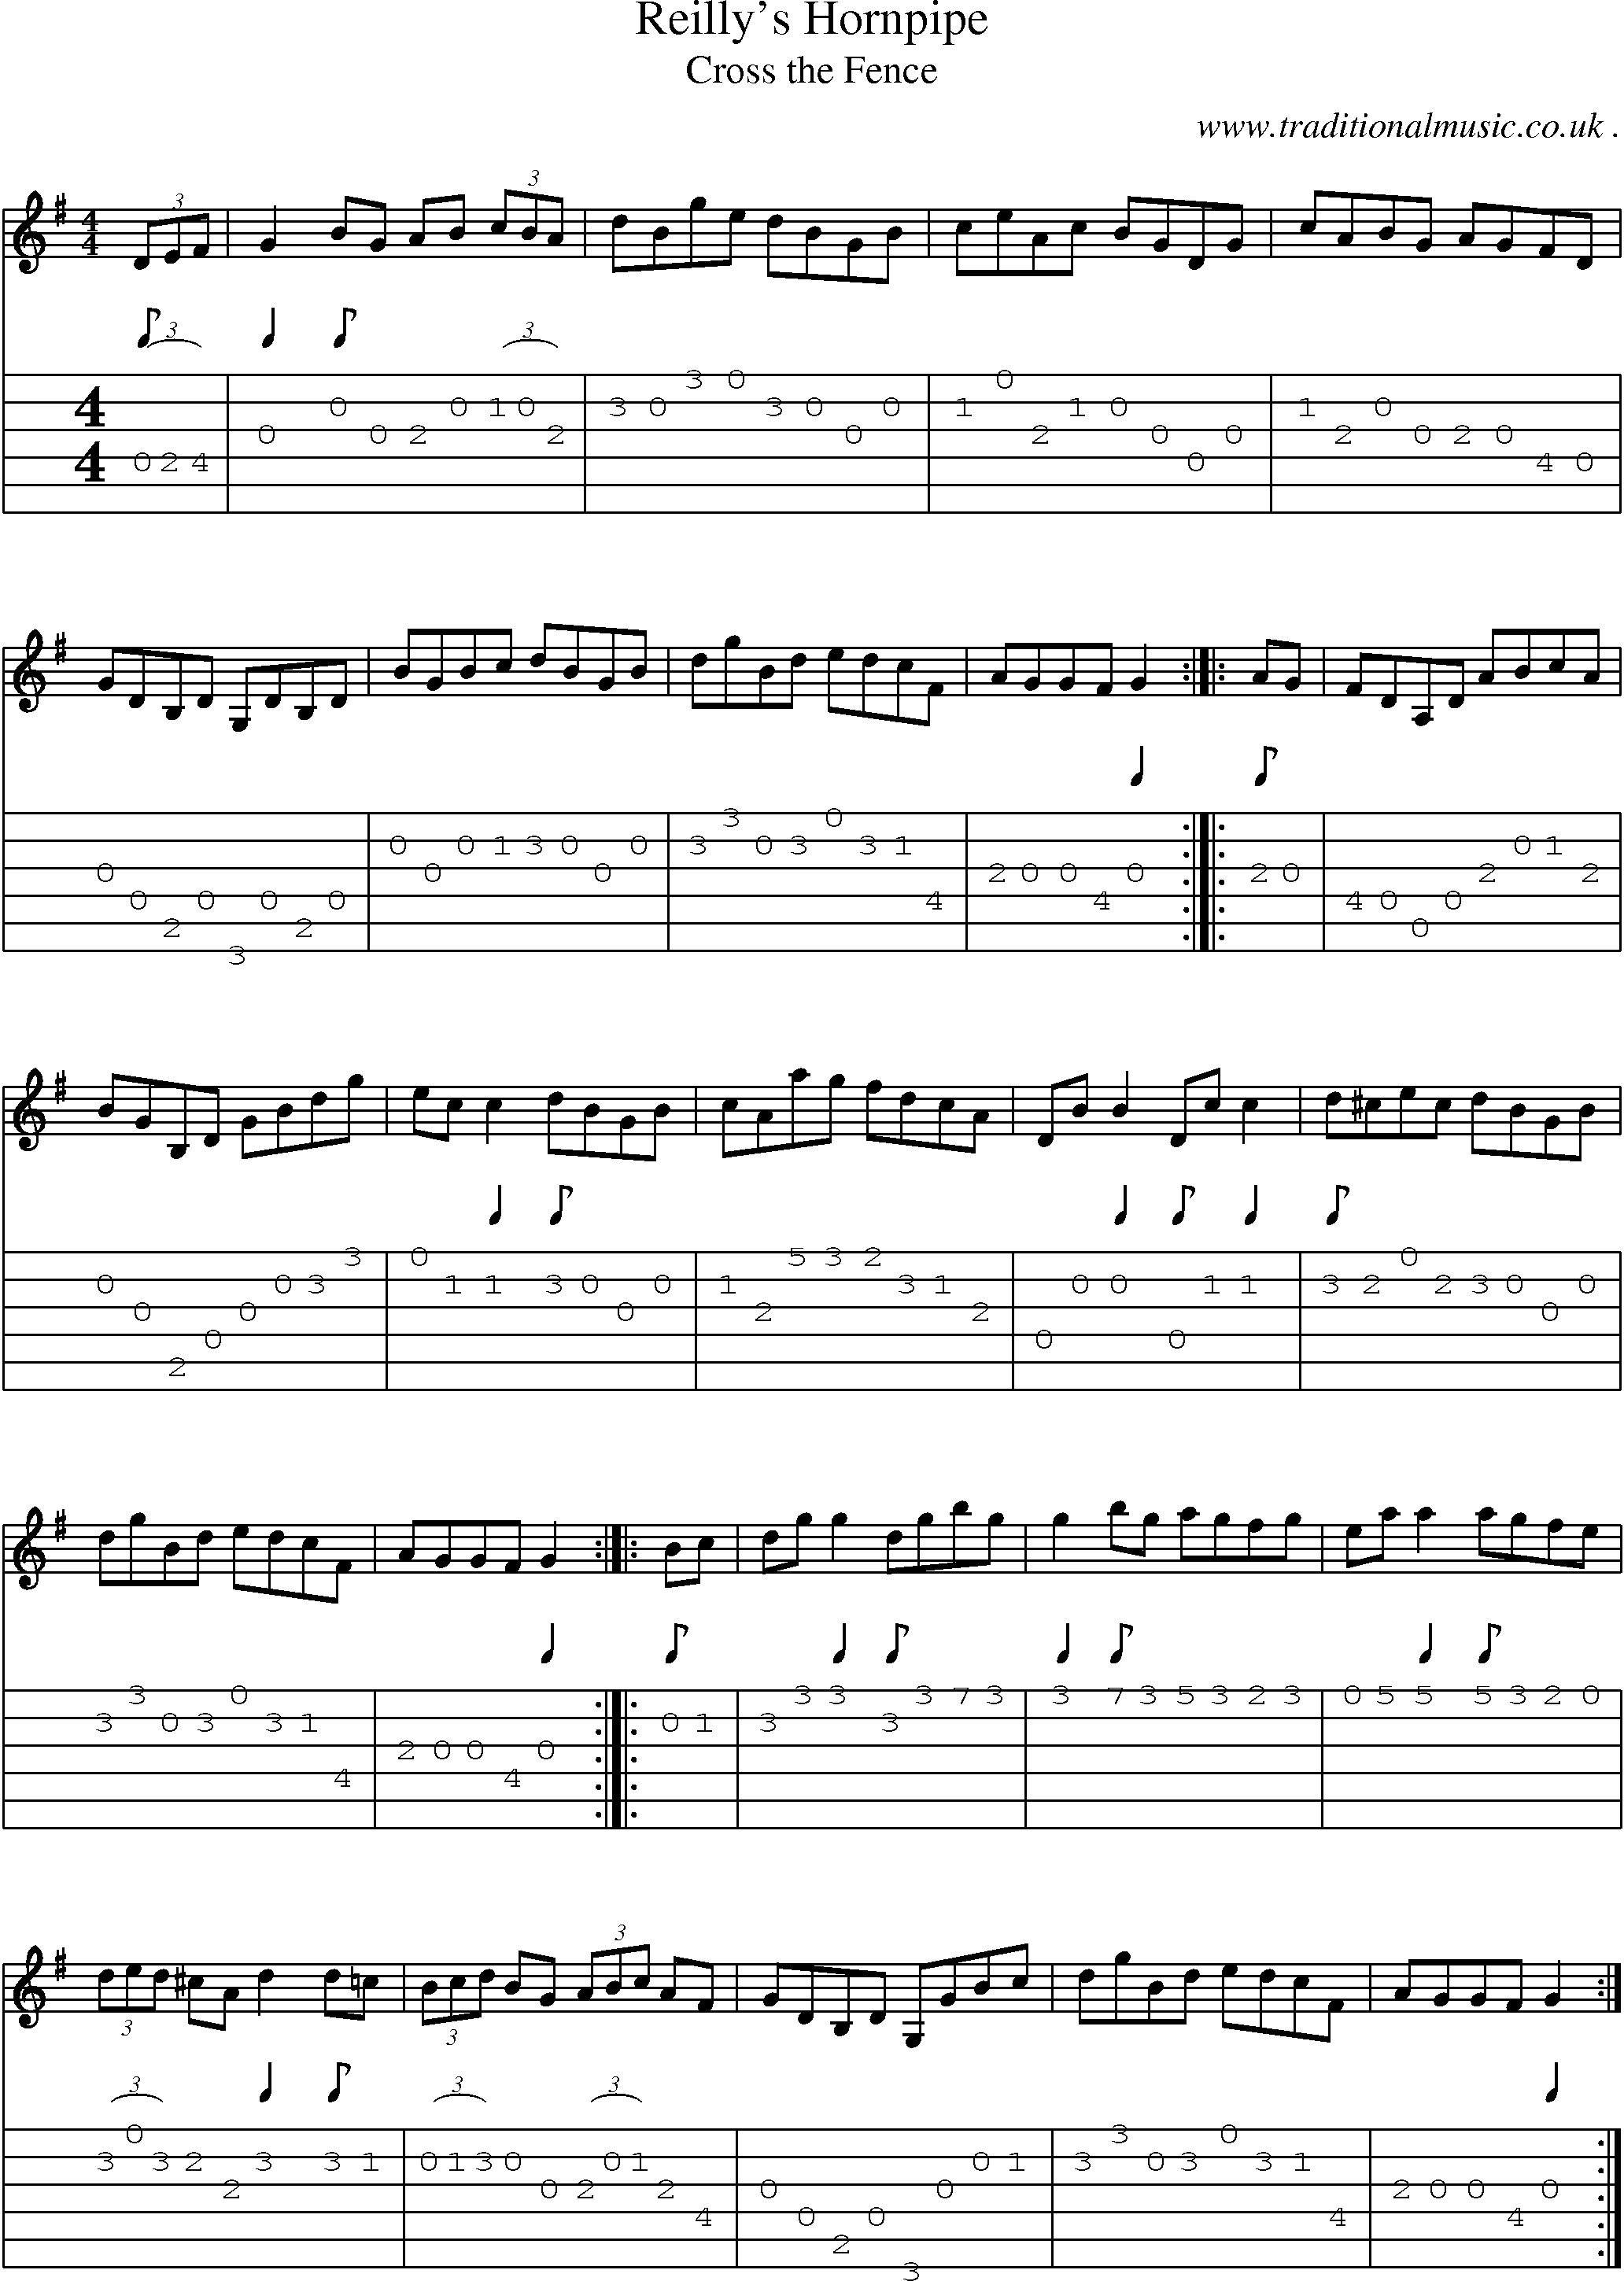 Sheet-Music and Guitar Tabs for Reillys Hornpipe